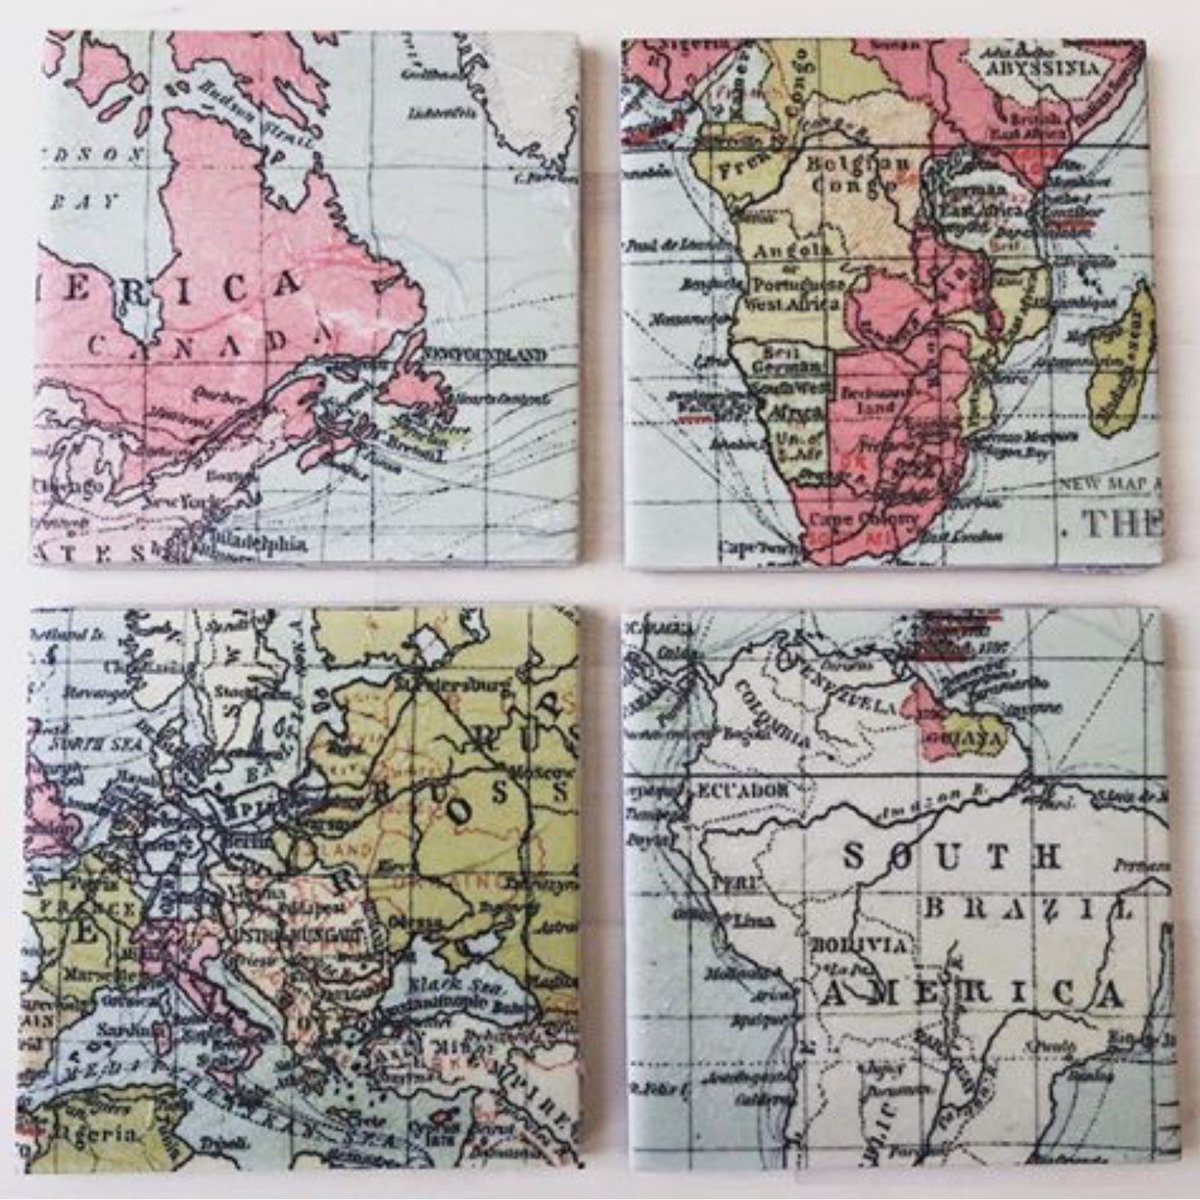 Planning somewhere warm to fly off to this summer? Get ahead & dream in real time with these map coasters. Cheers! woodstockdesignuk.co.uk

#woodstockdesignuk #holiday #summerholiday #coasters #drinkscoasters #handmade #upcycling #reloved #furnituredesign #herts #upcycledhour